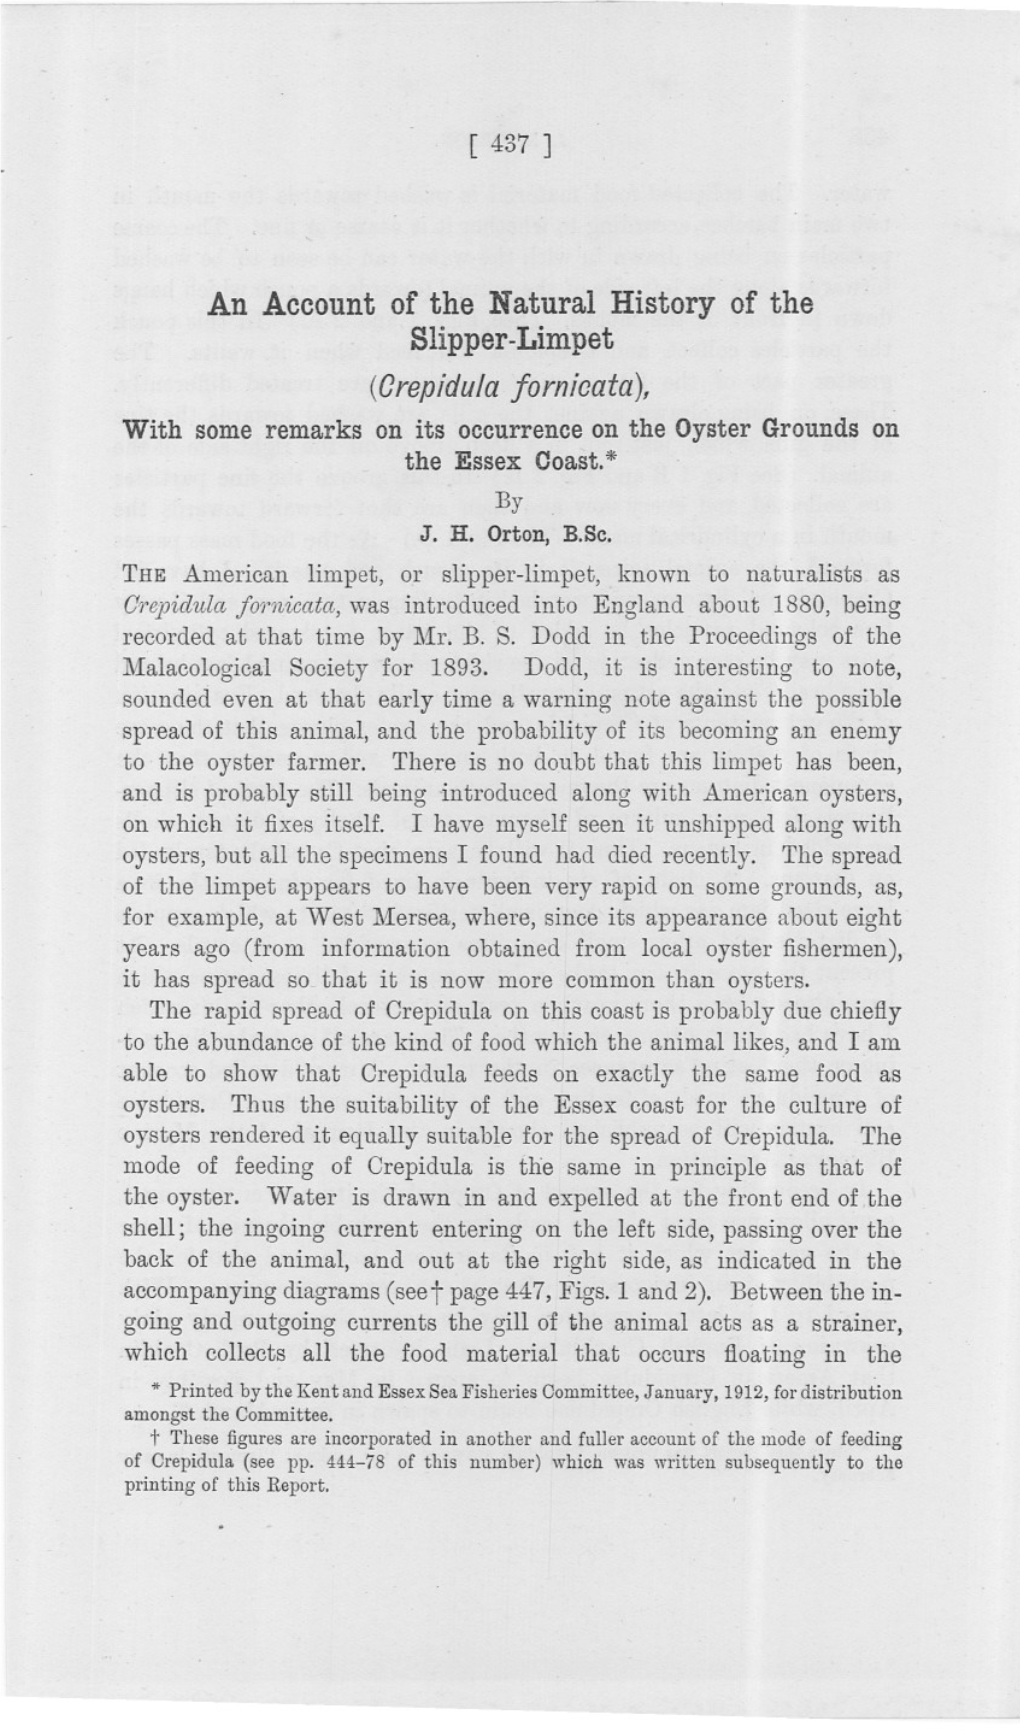 An Account of the Natural History of the Slipper-Limpet (Grepidula Jornioata), with Some Remarks on Its Occurrence on the Oyster Grounds on the Essex Coast